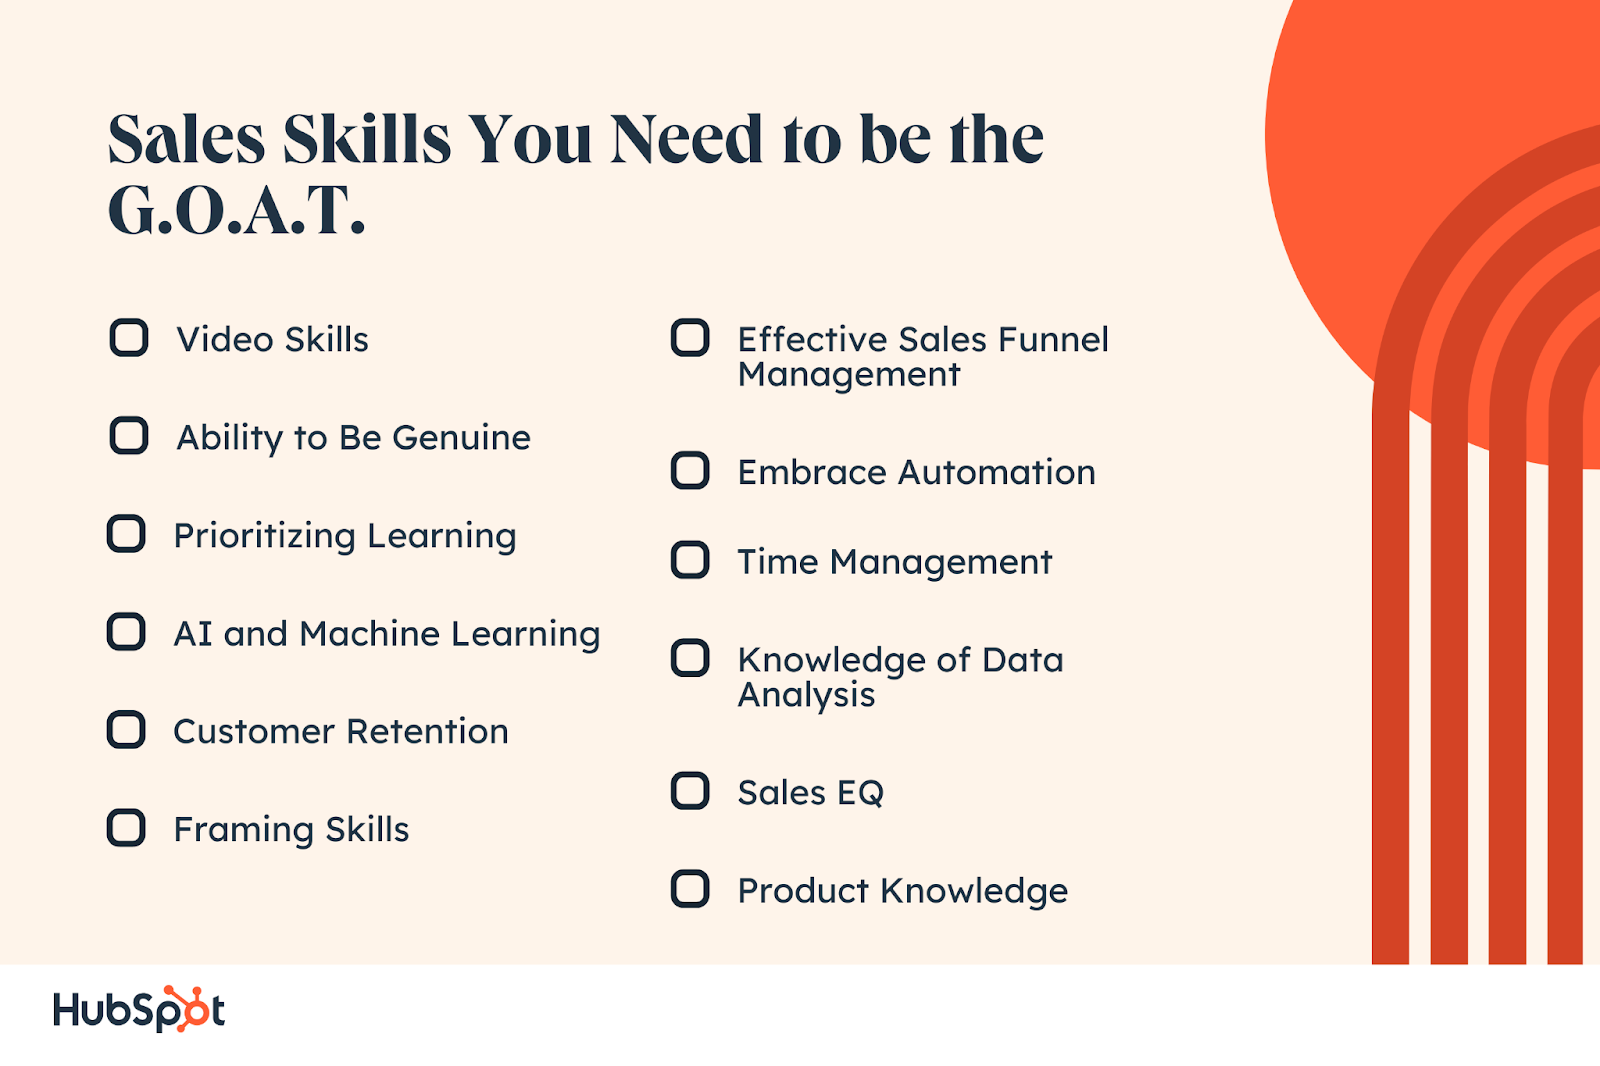 Sales Skills You Need to be the G.O.A.T. Video Skills. Prioritizing Learning. AI and Machine Learning. Ability to Be Genuine. Customer Retention. Embrace Automation. Effective Sales Funnel Management. Framing Skills. Time Management. Knowledge of Data Analysis. Product Knowledge. Sales EQ.